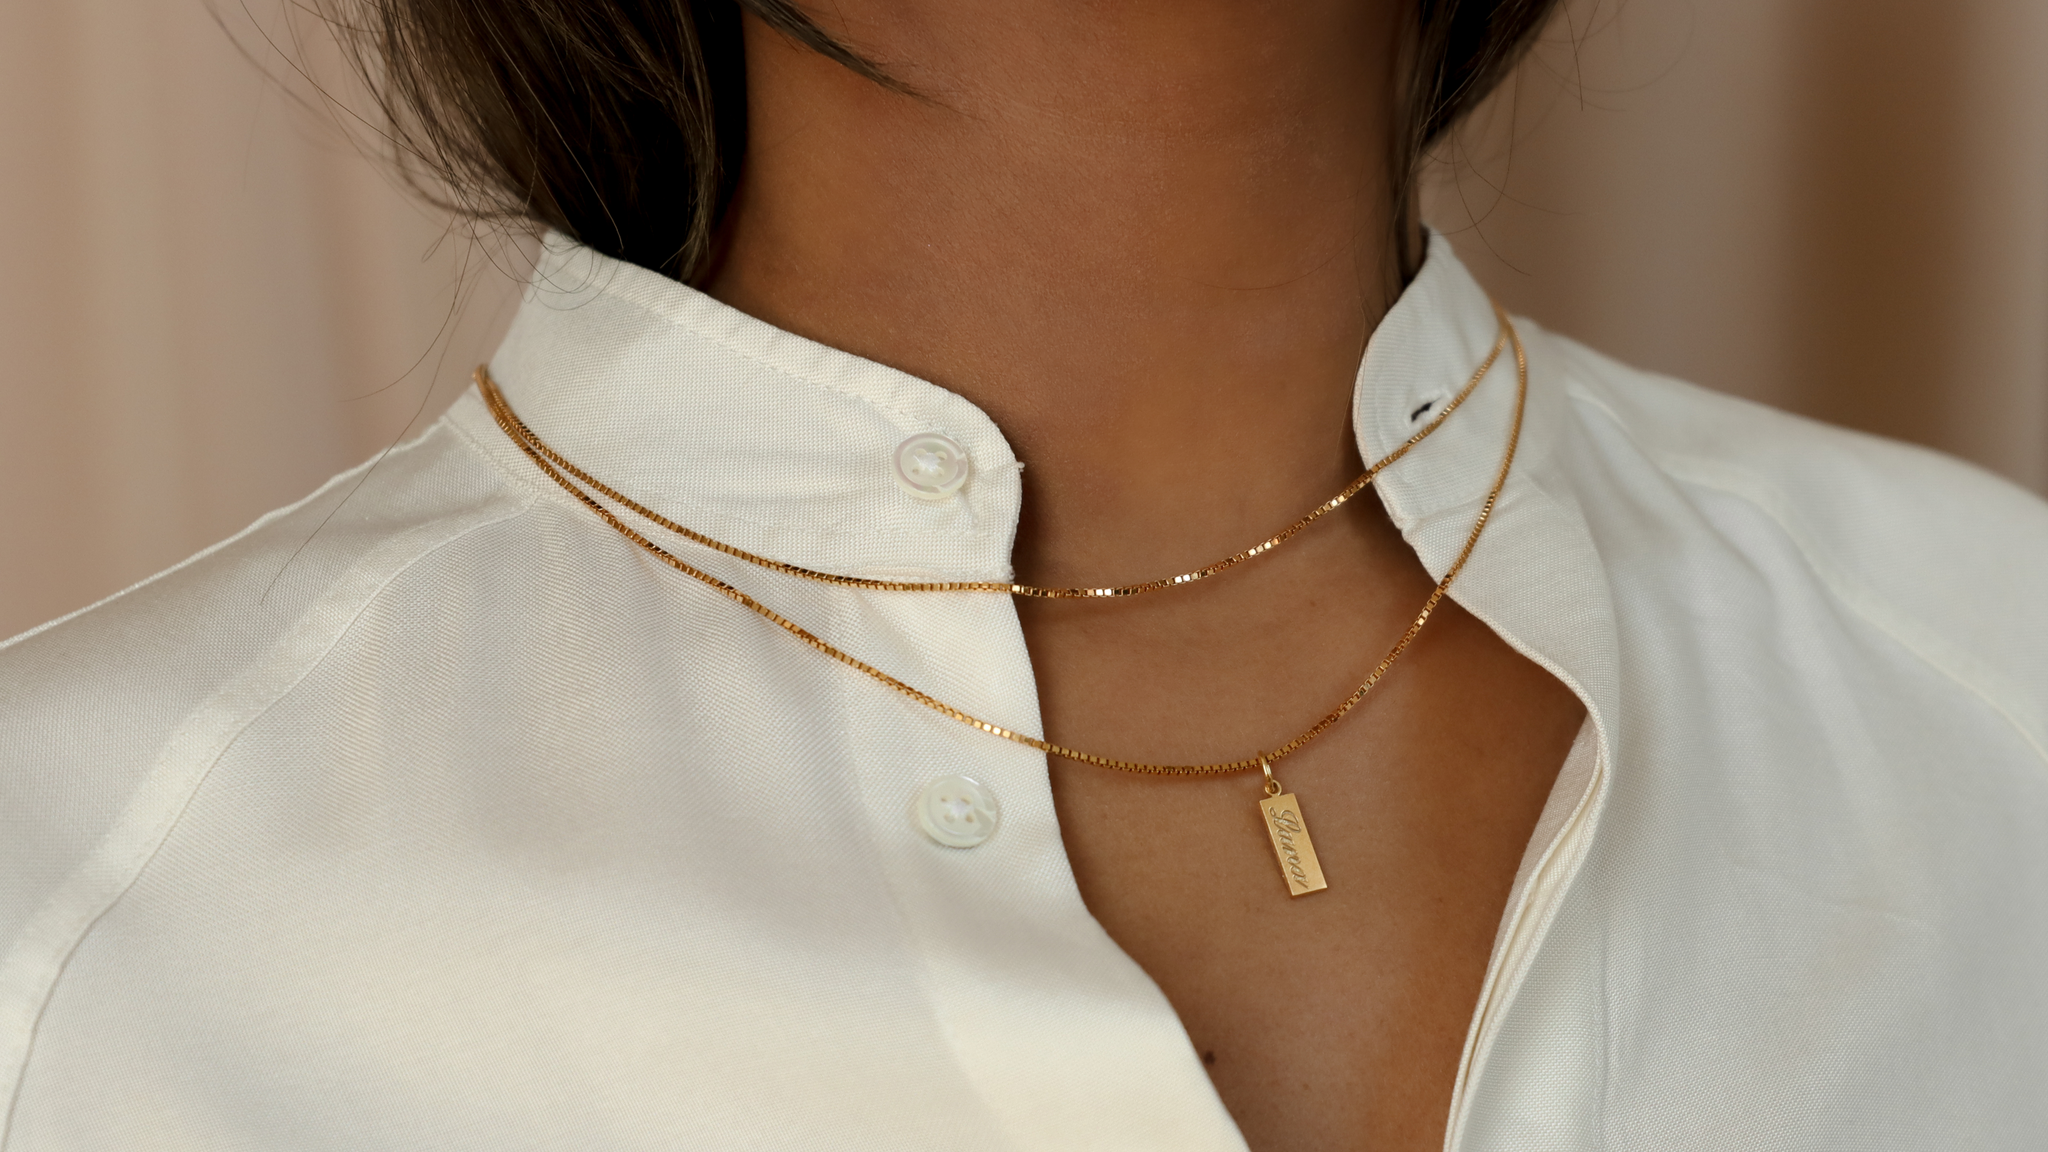 box chain necklace, tag necklace, minimalist jewelry, necklace layer, necklace stack, dainty necklaces, personalized tag necklace, personalized name necklace, simple layering necklace, gold necklaces, jewelry trends 2021, modern necklace